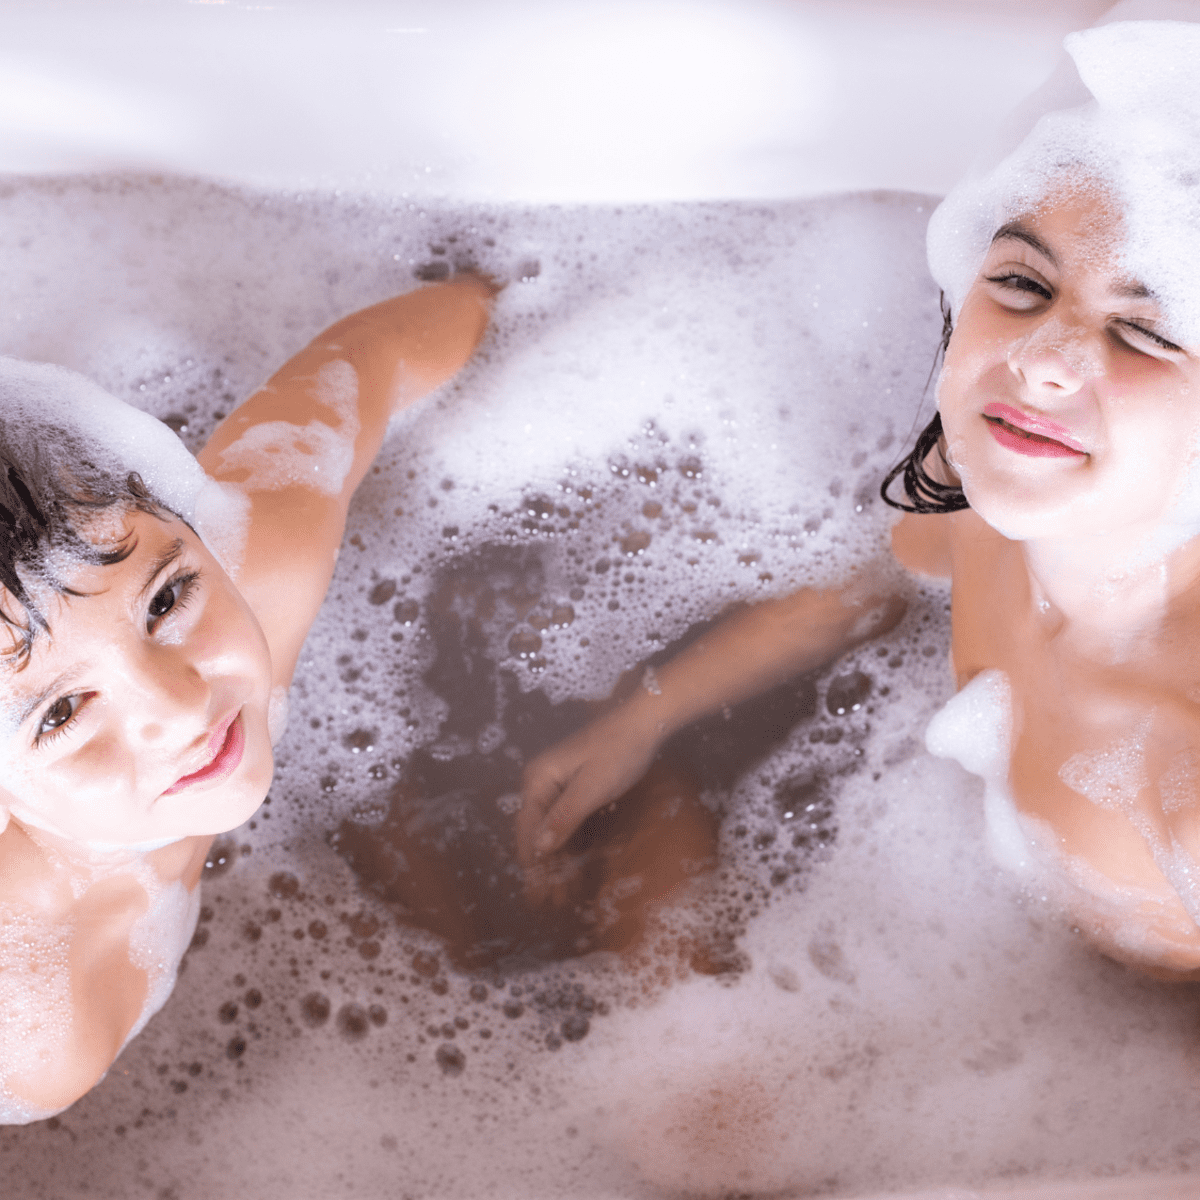 Parents Who Shower With Their Kids: Benefits and When to Stop - WeHaveKids